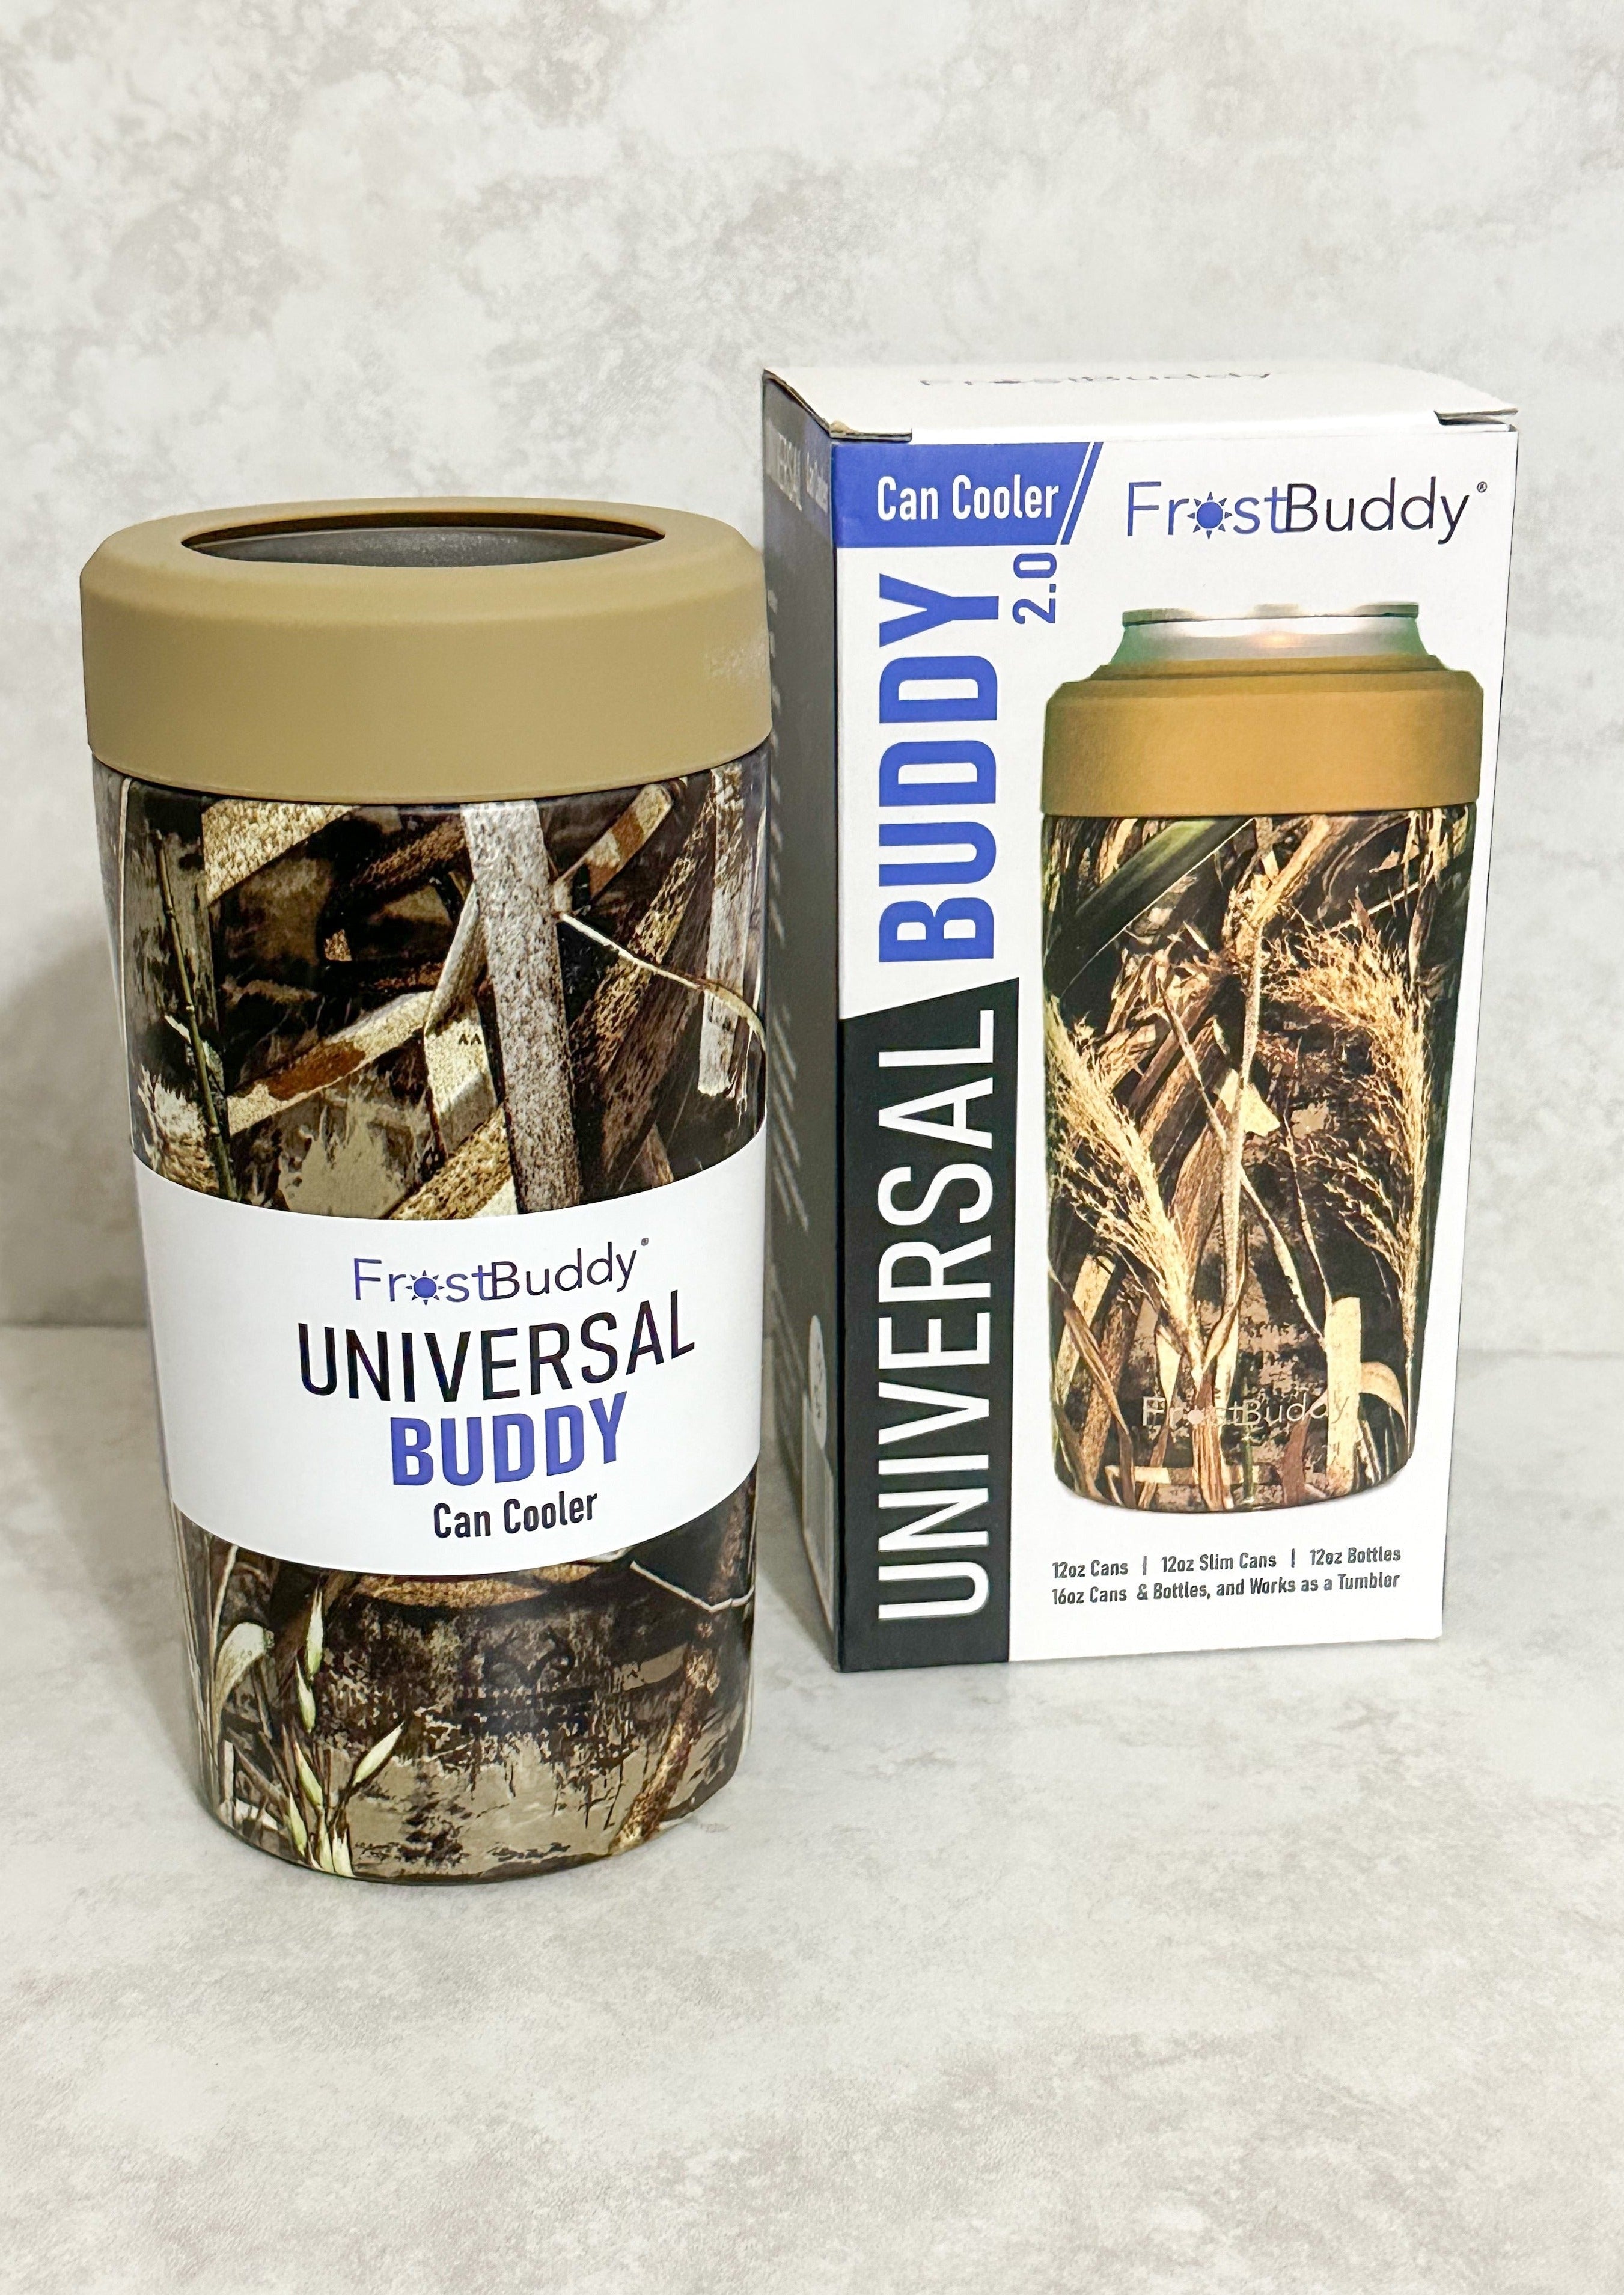 Frost Buddy, UNIVERSAL CAN COOLER